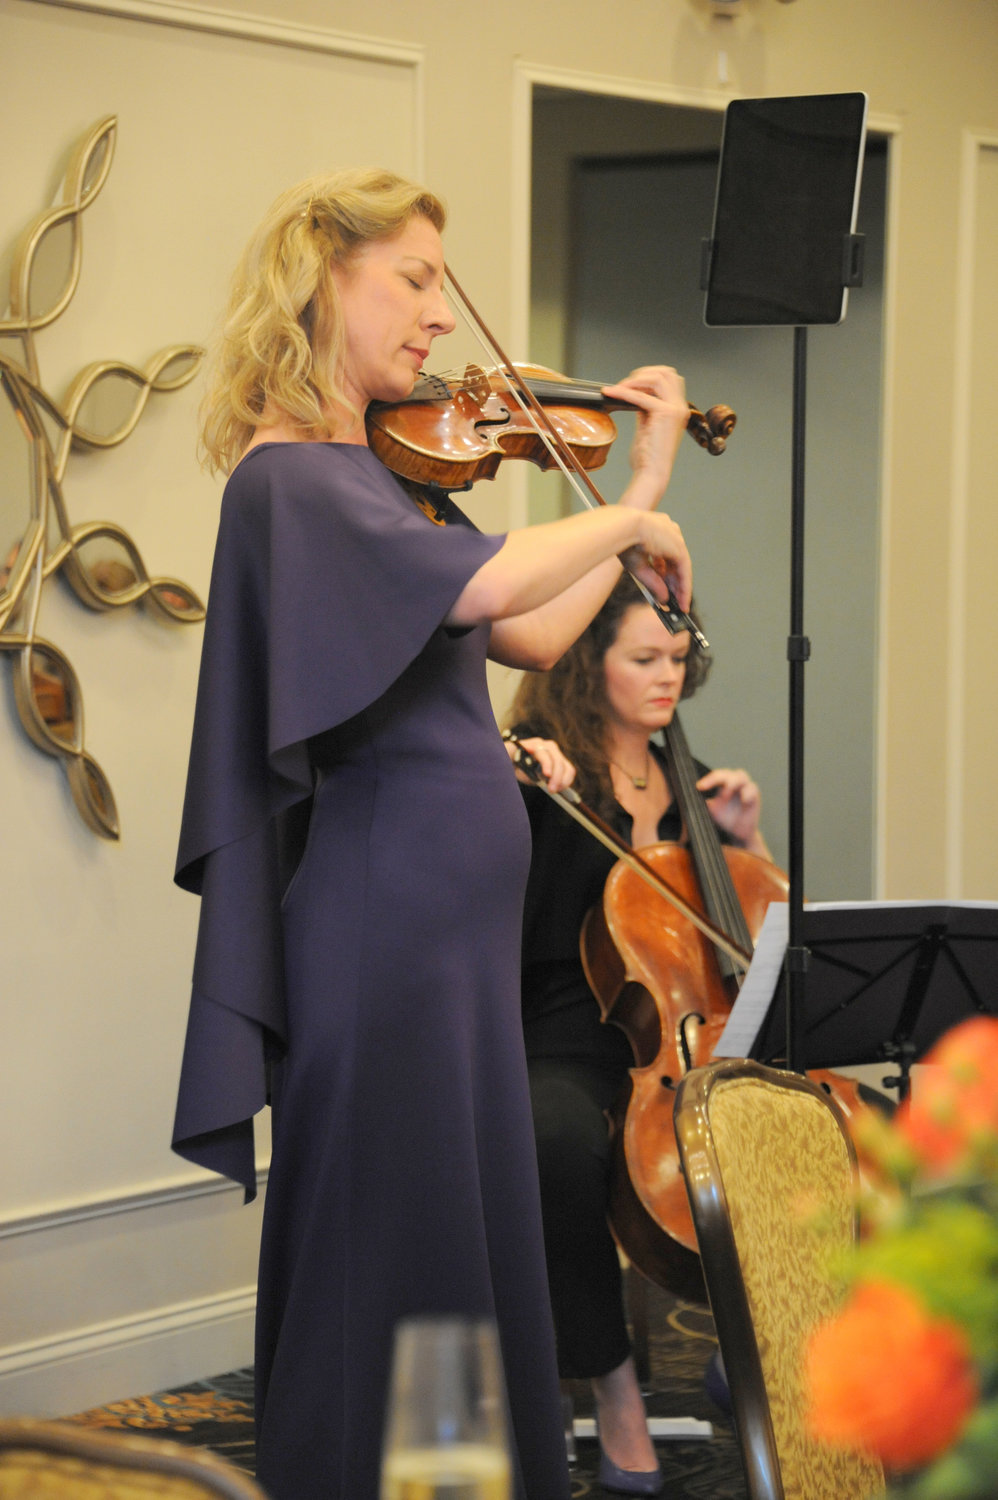 Elizabeth Pitcairn wore purple in honor of the late Queen Elizabeth II
as she performed at the 70th anniversary gala for the Bucks County Symphony Orchestra.